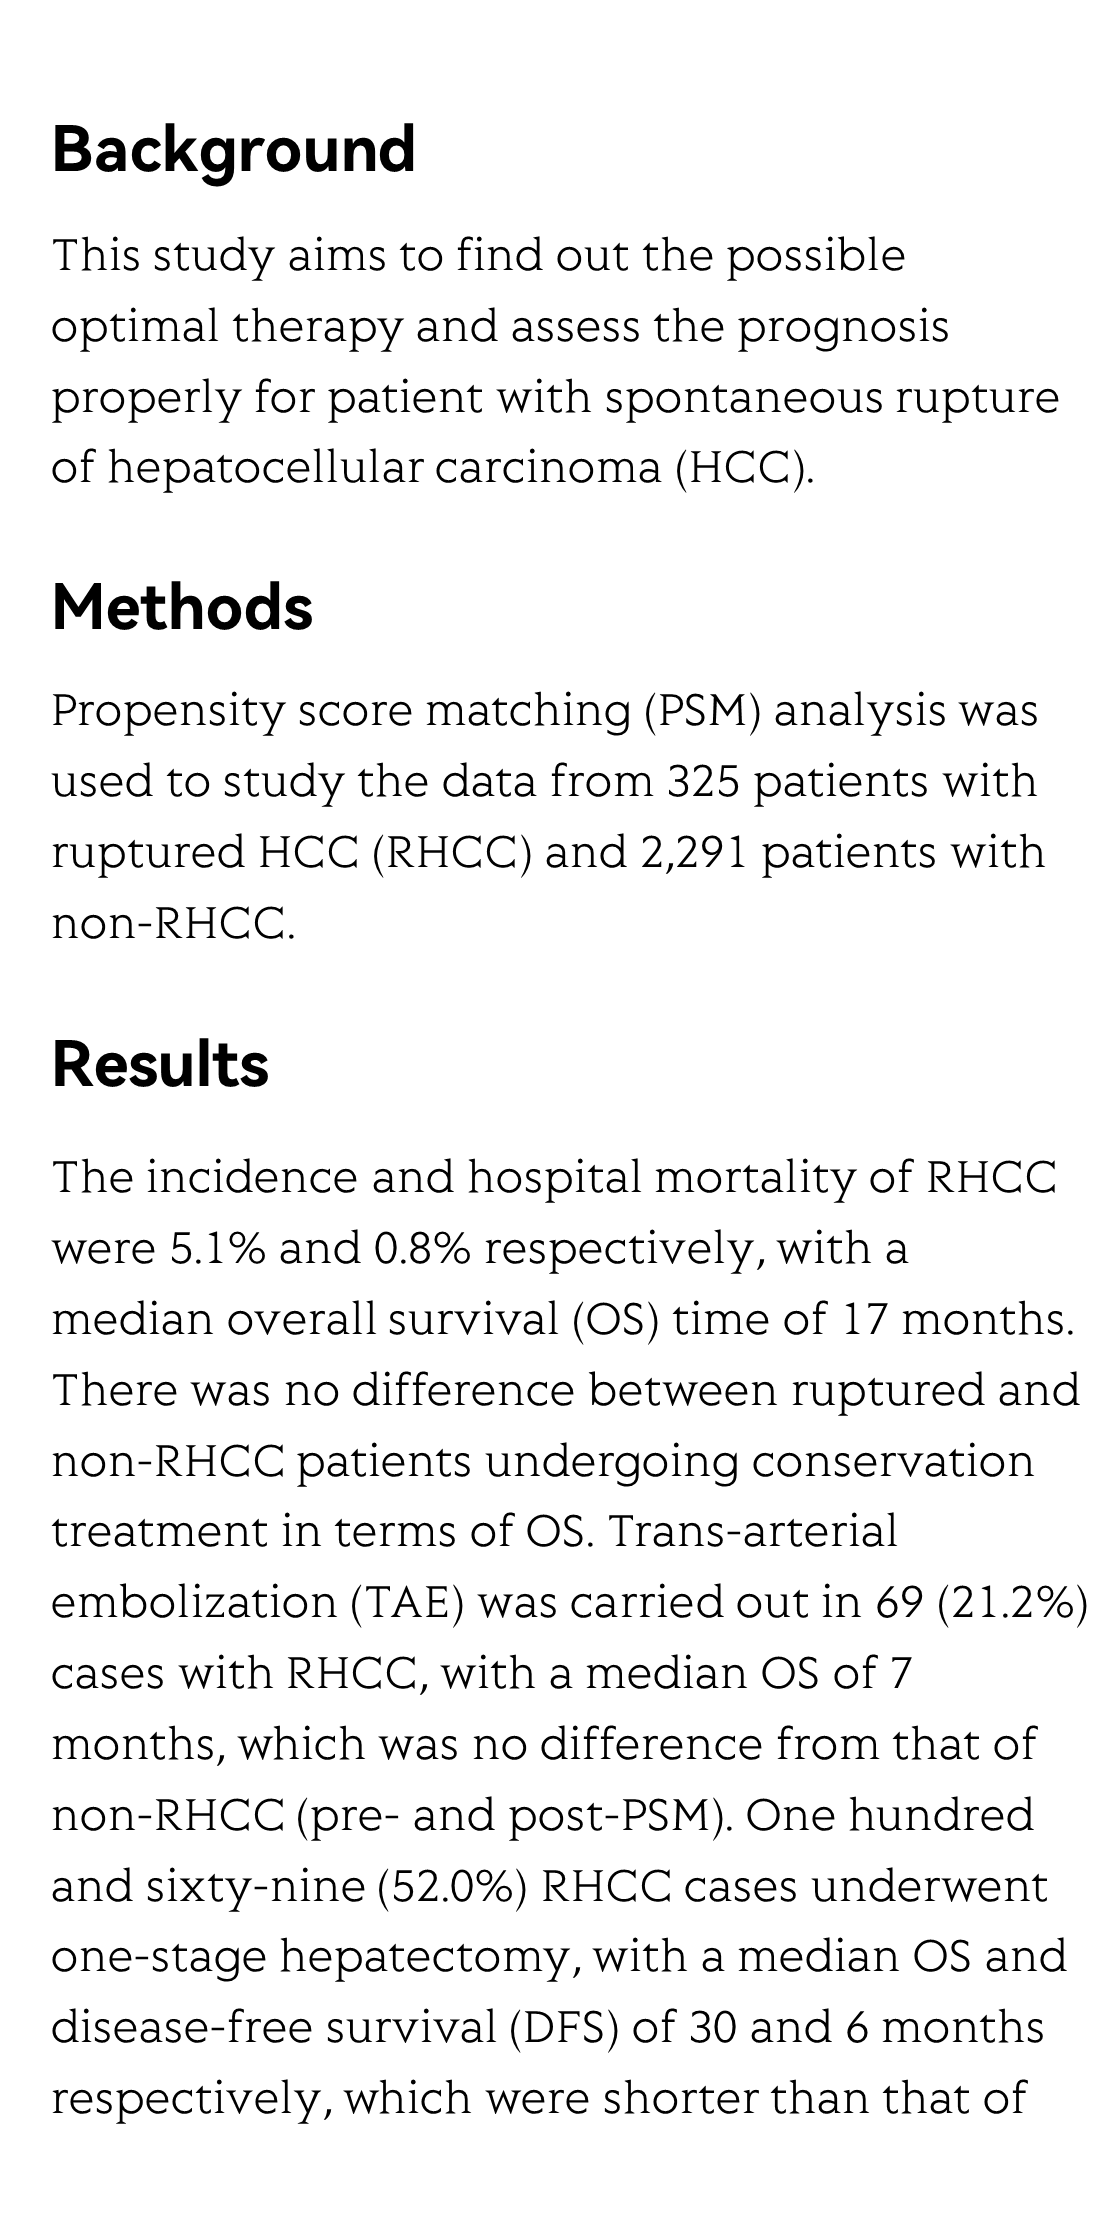 Propensity score matching study of 325 patients with spontaneous rupture of hepatocellular carcinoma_2